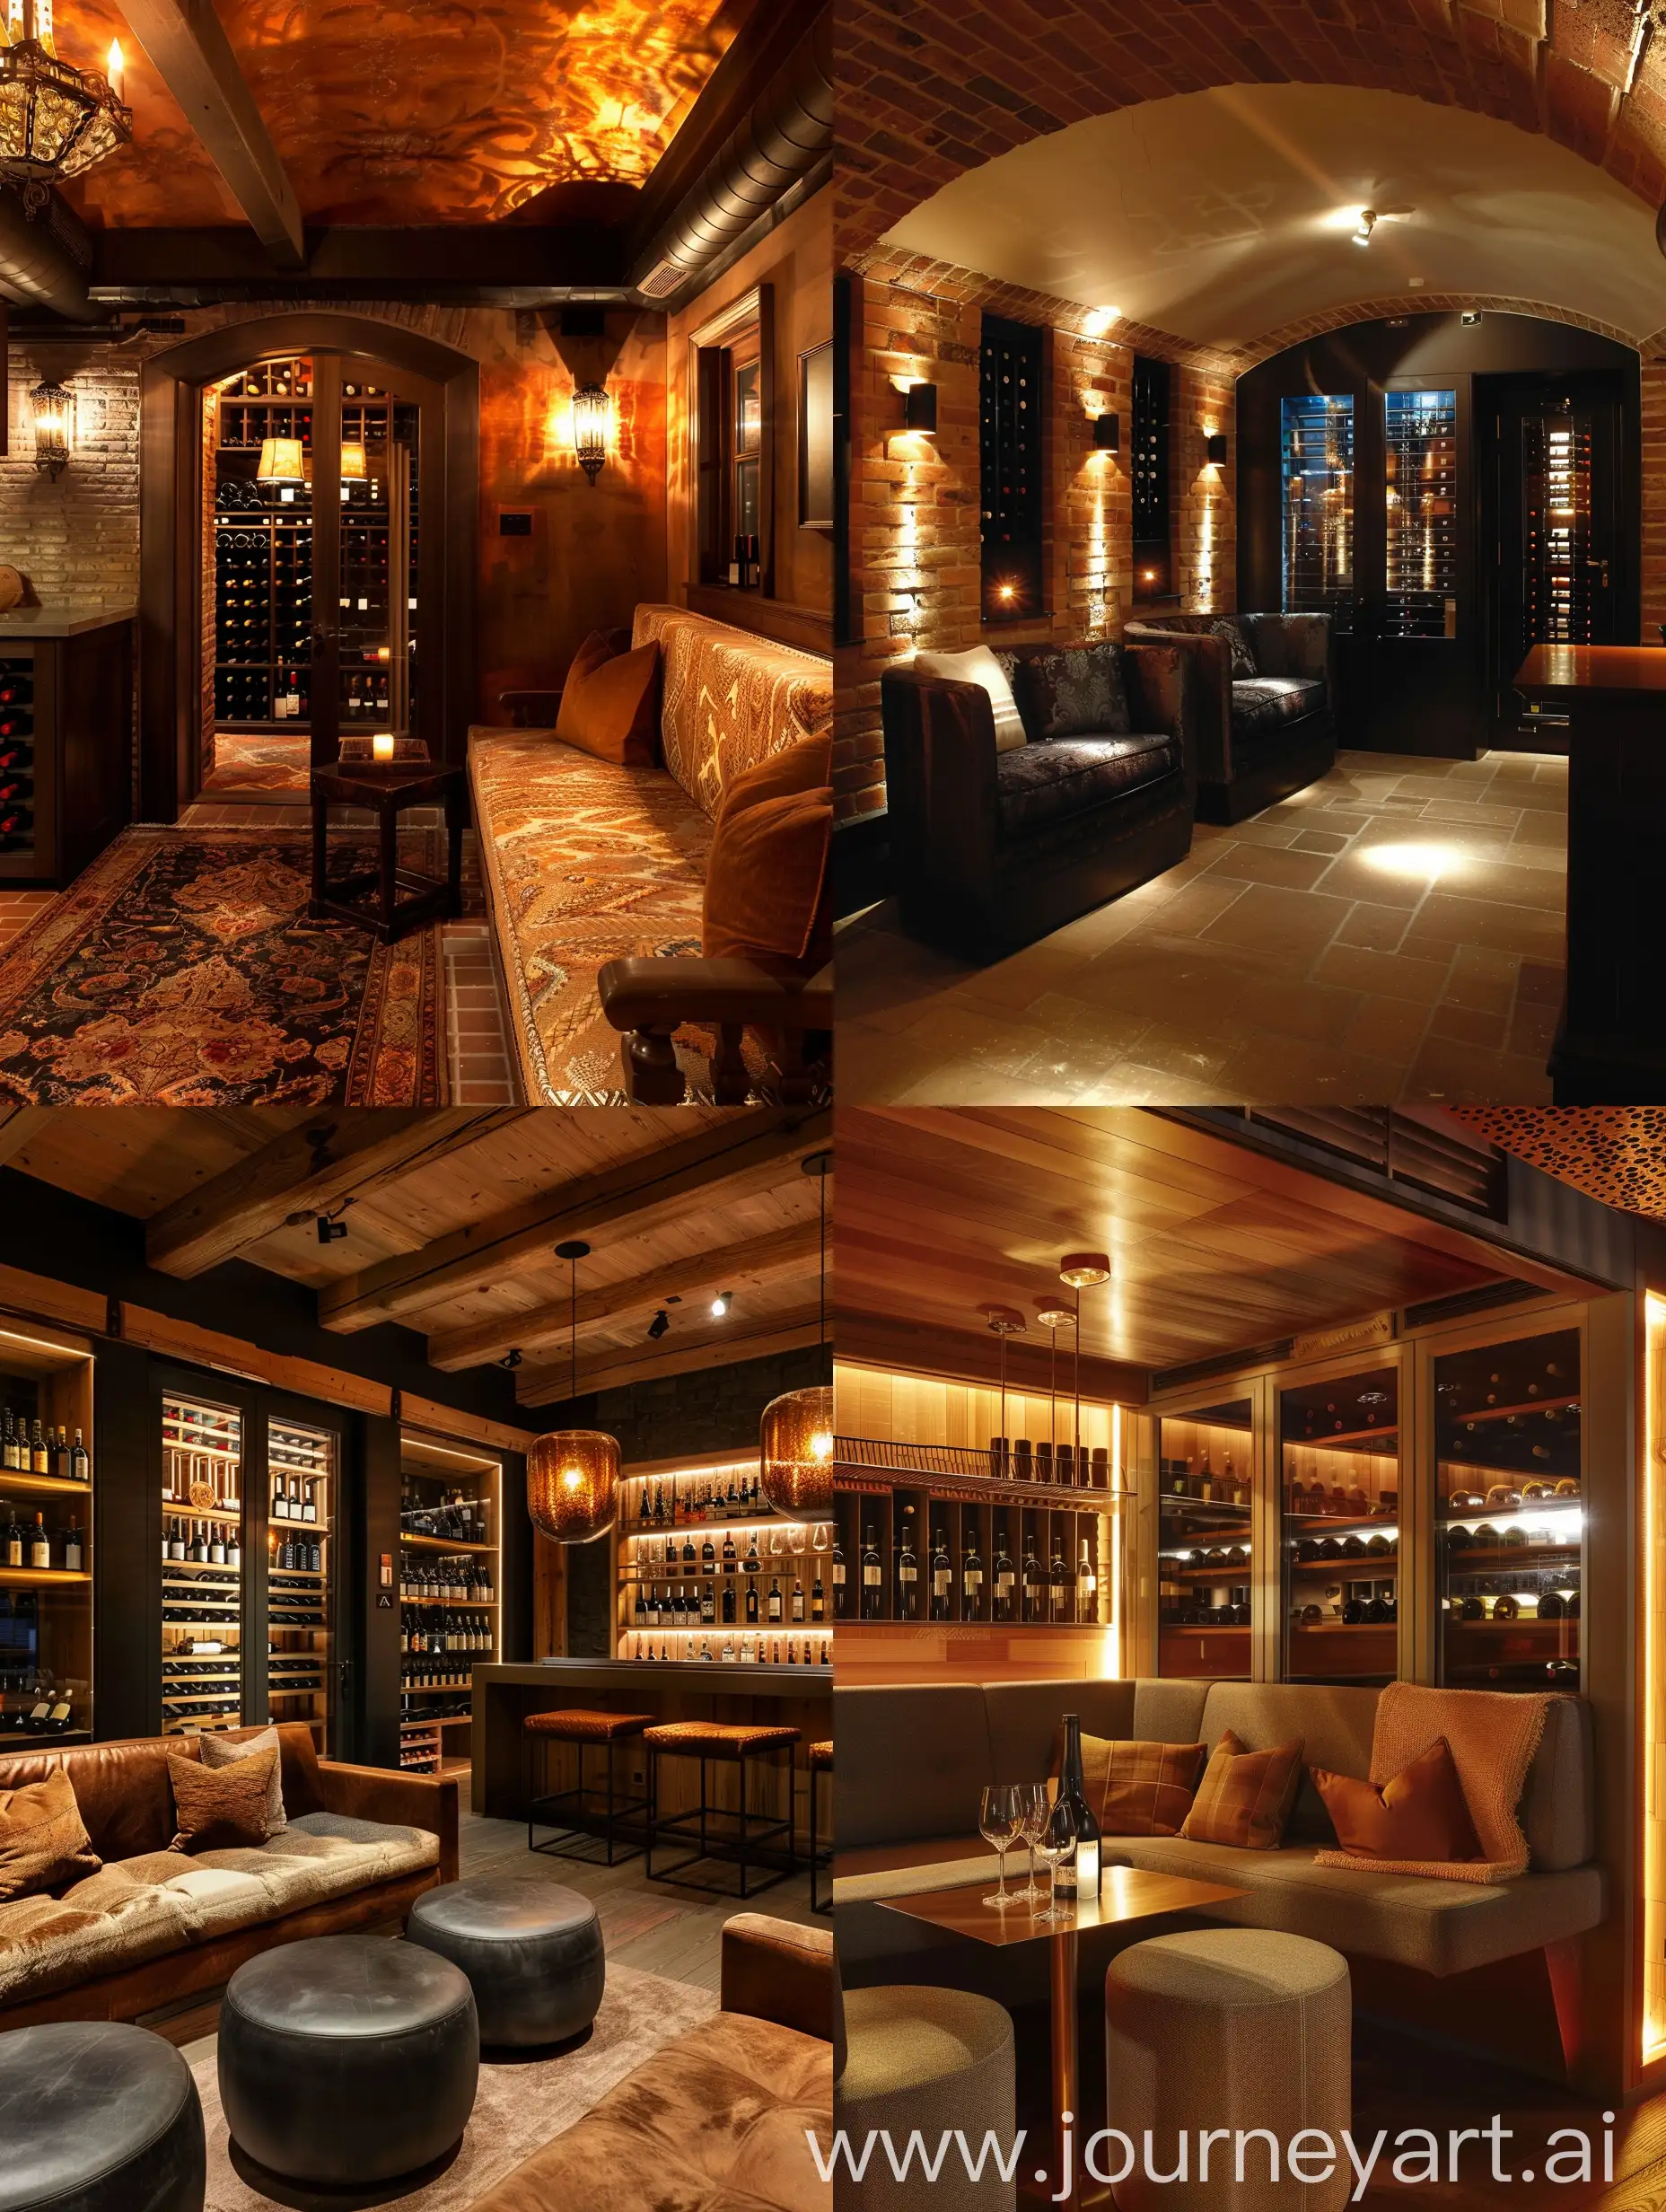 Noble-Gathering-in-a-Warmly-Lit-Wine-Cellar